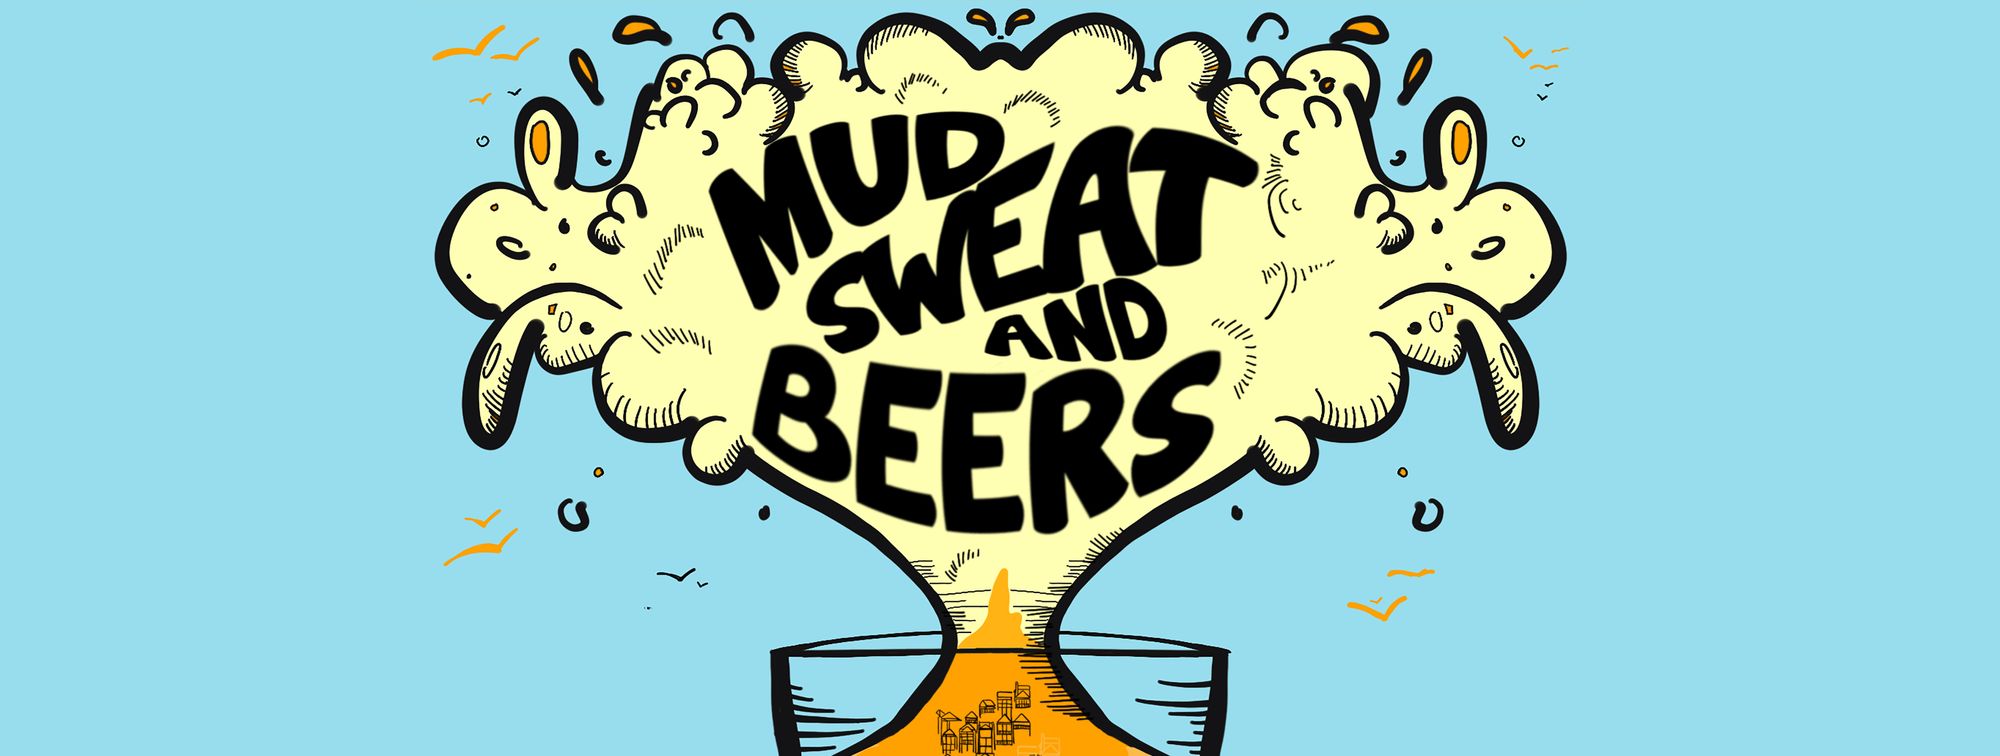 Mud, Sweat & Beers (and 45 bartenders donating their time) will raise money for flood relief this Sunday